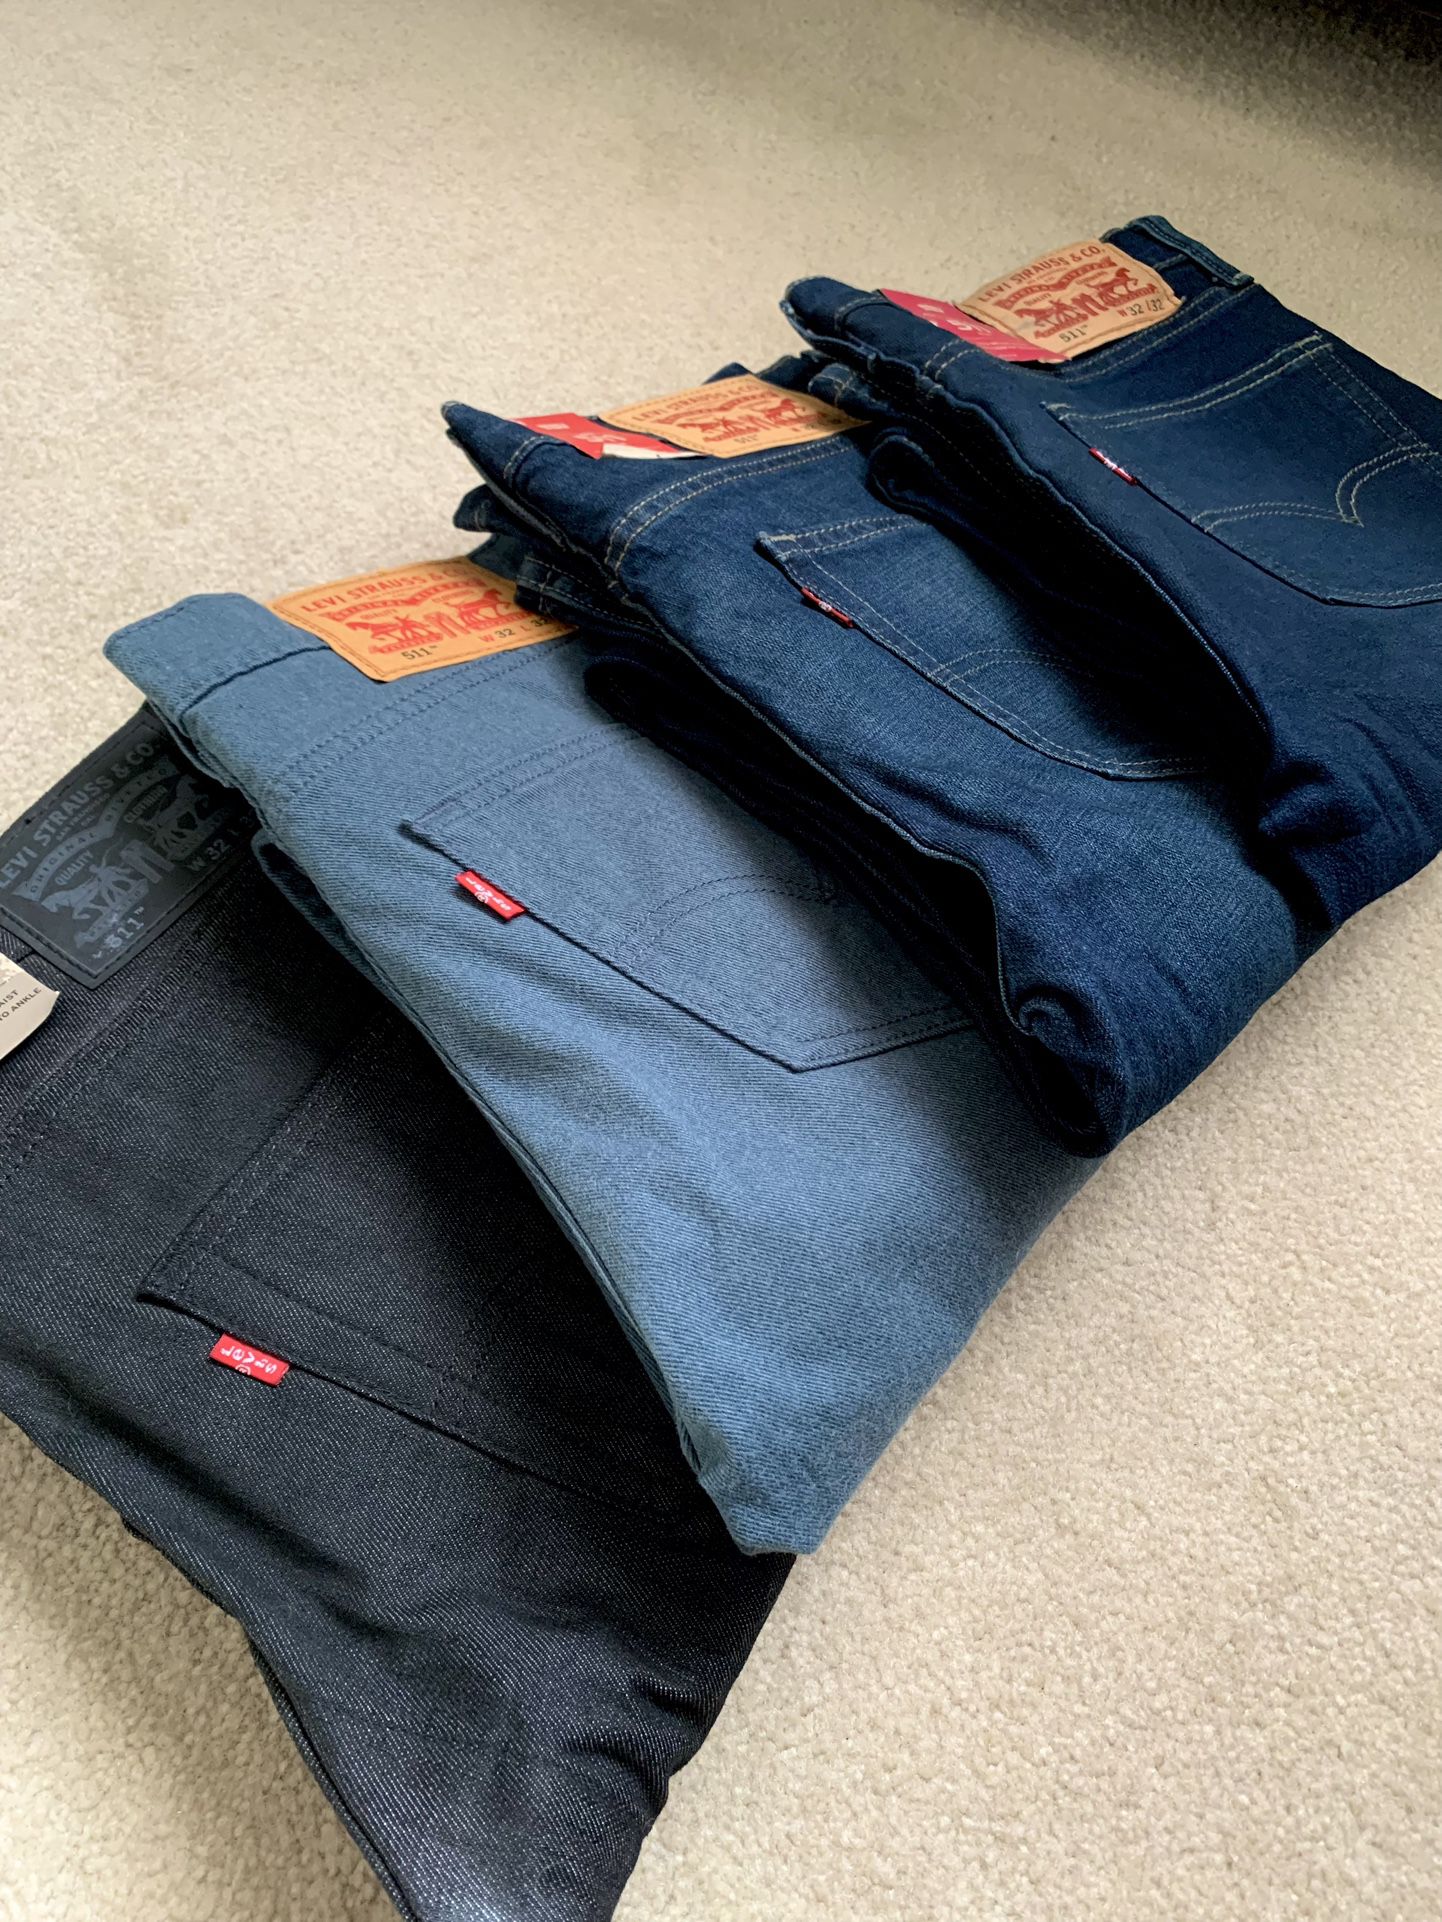 Levi's 511 Slim Fit ( 32x32 ) ( Lot Of 4 ) ( New ) for Sale in Pico Rivera,  CA - OfferUp